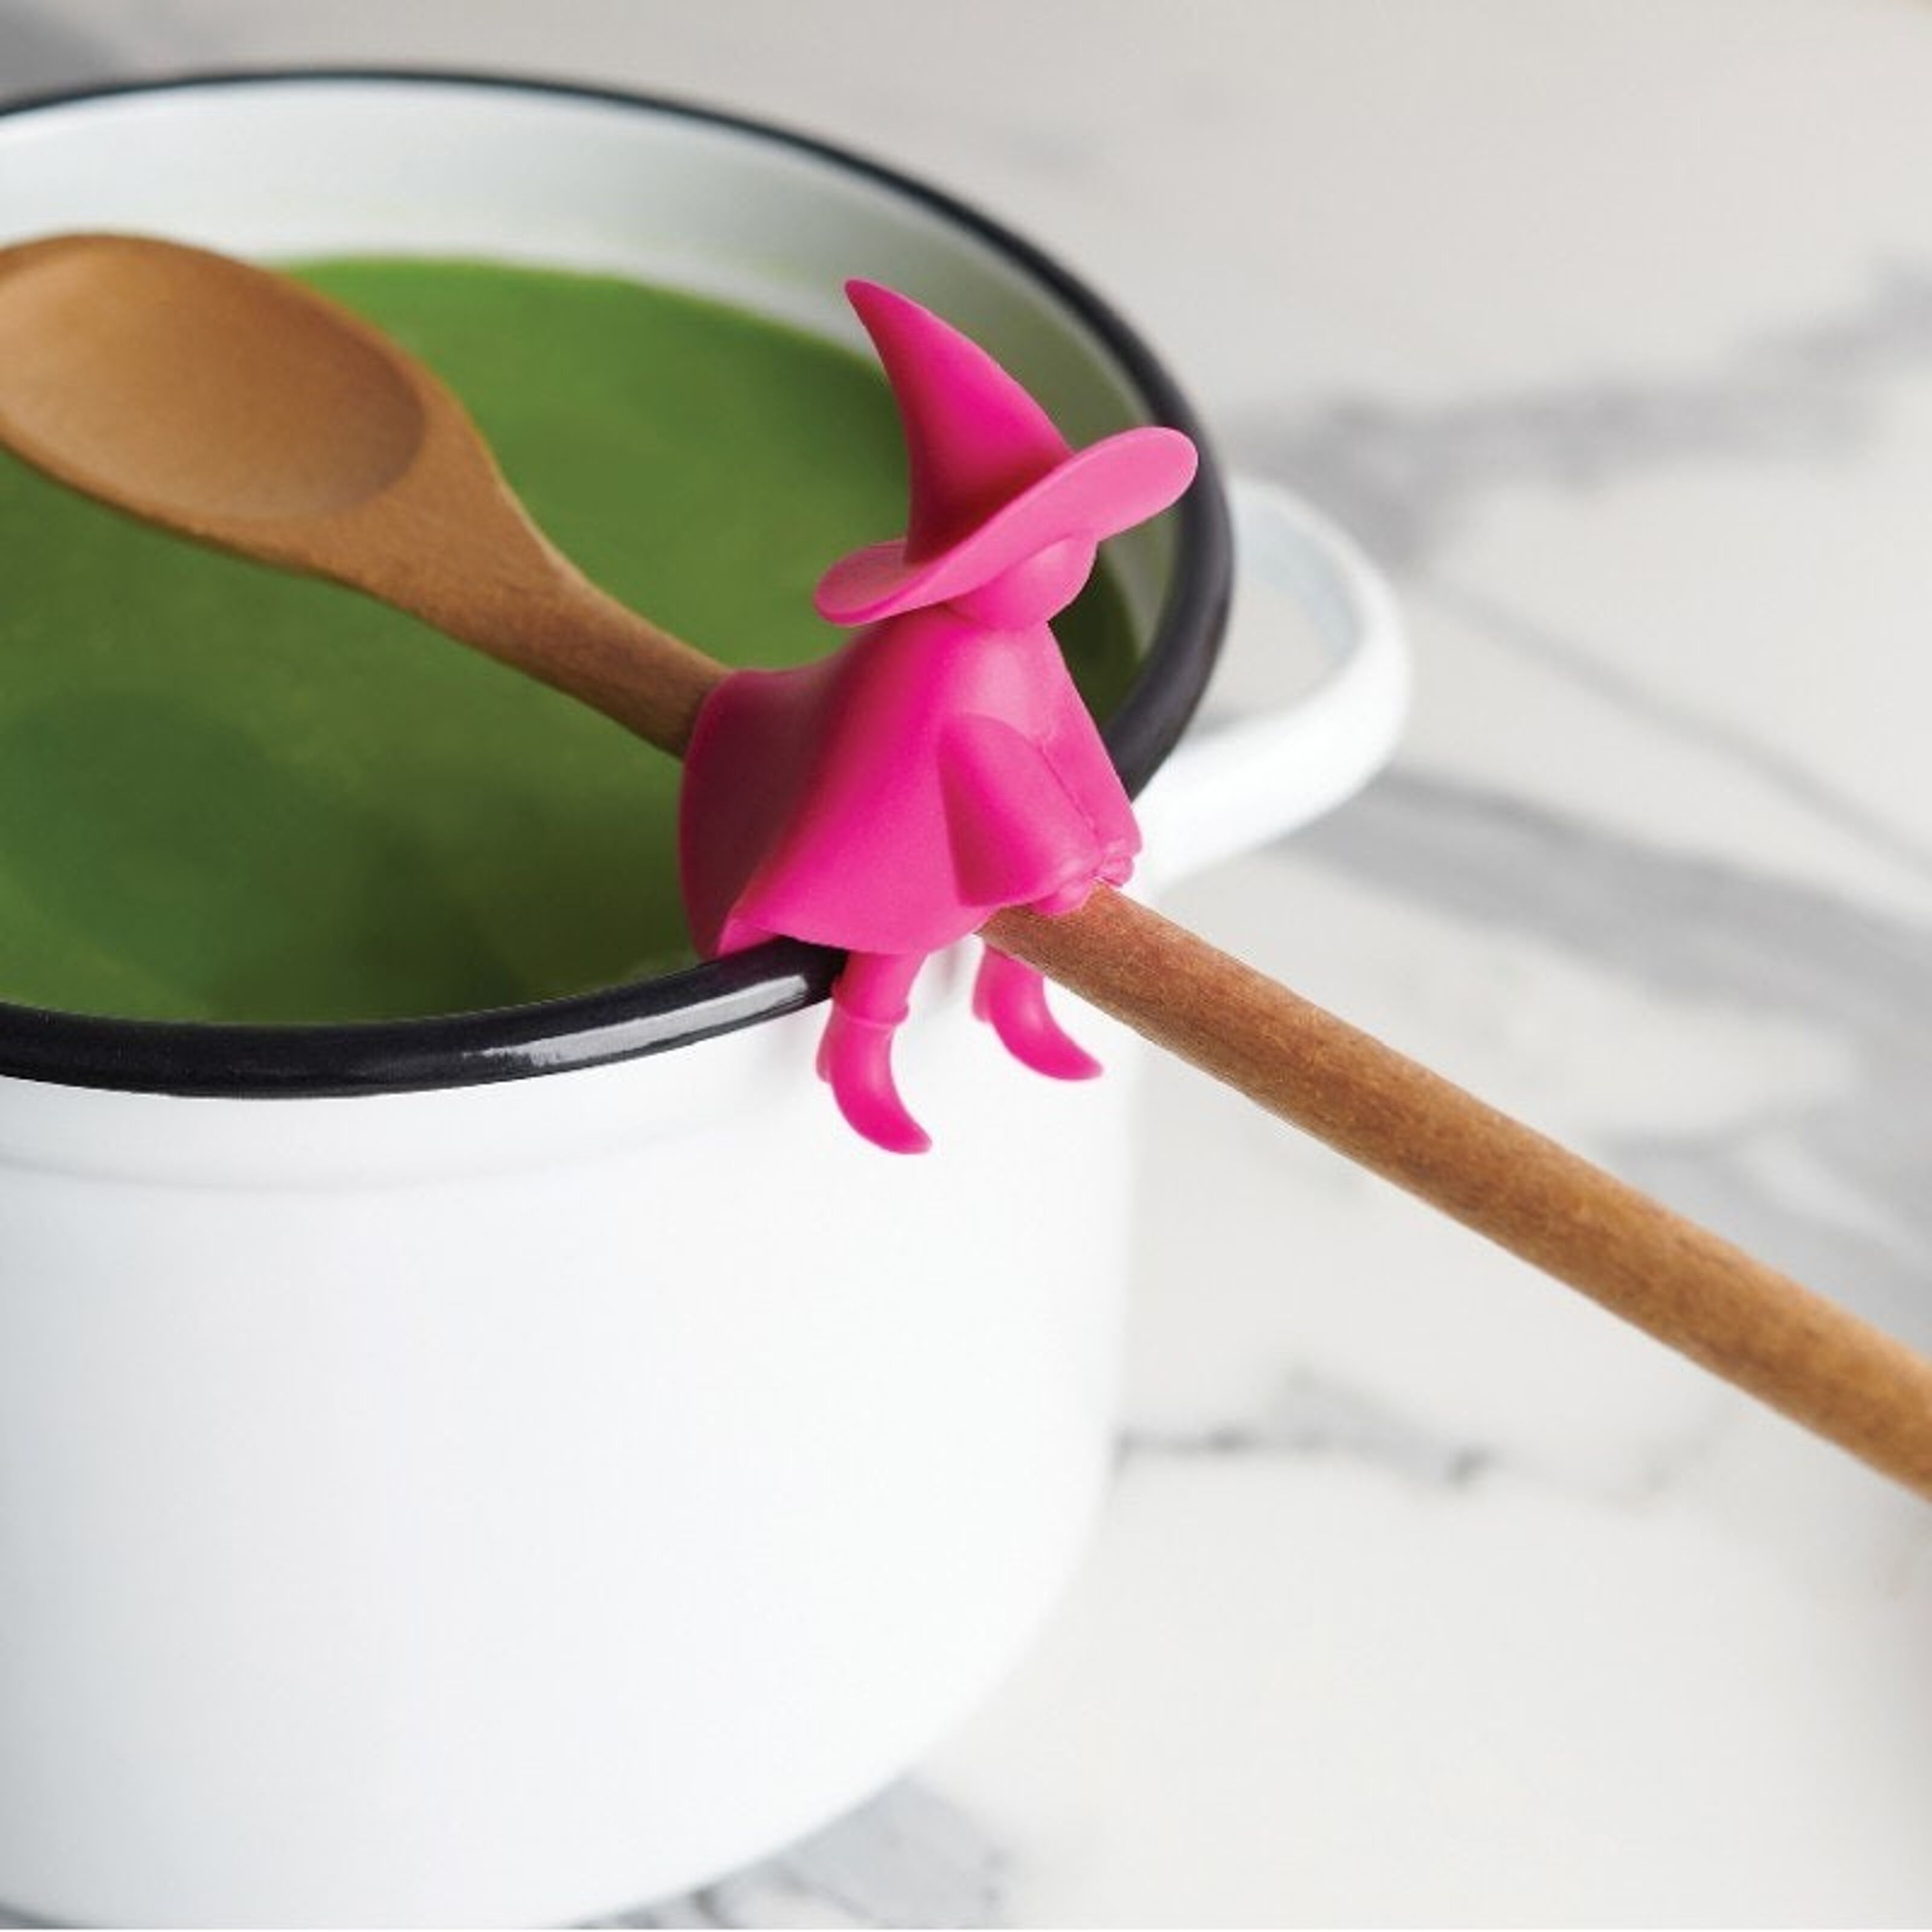 NEW! Agatha Witch Spoon Holder Steam Releaser- Ototo-Designed by